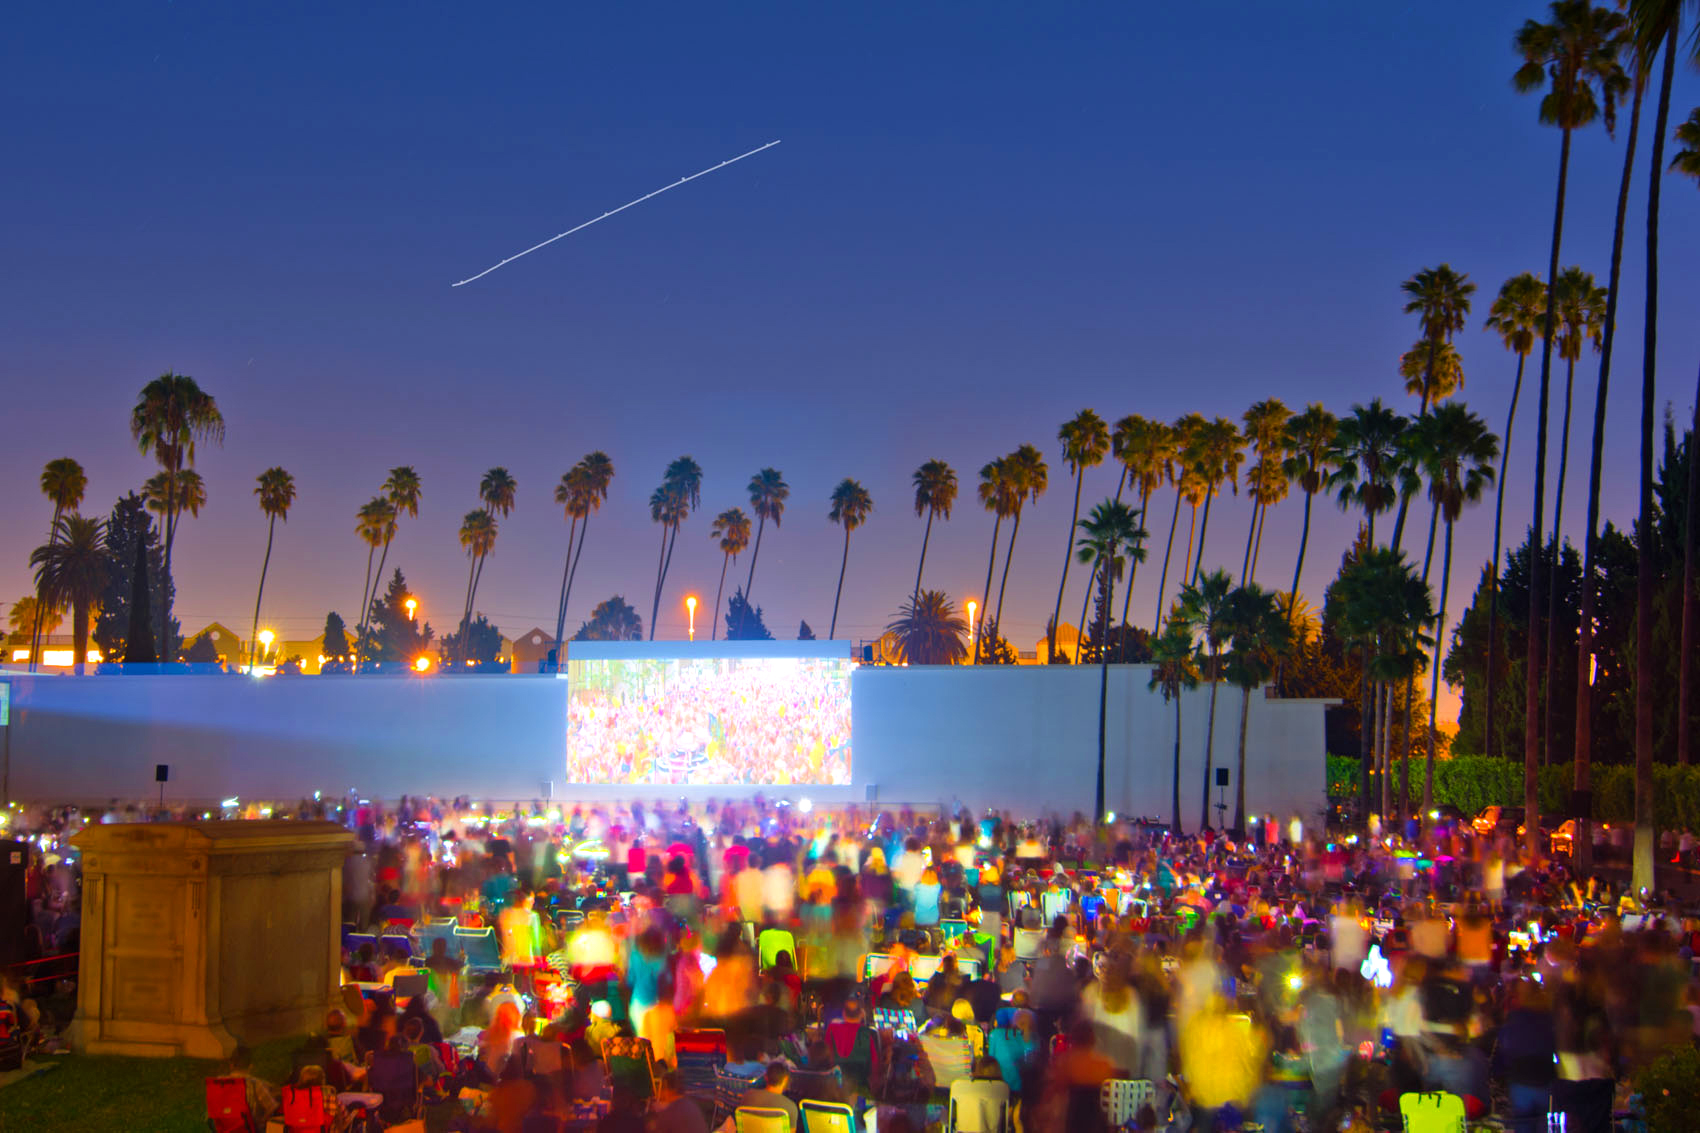 The Lord of the Rings: The Fellowship of the Ring - Cinespia